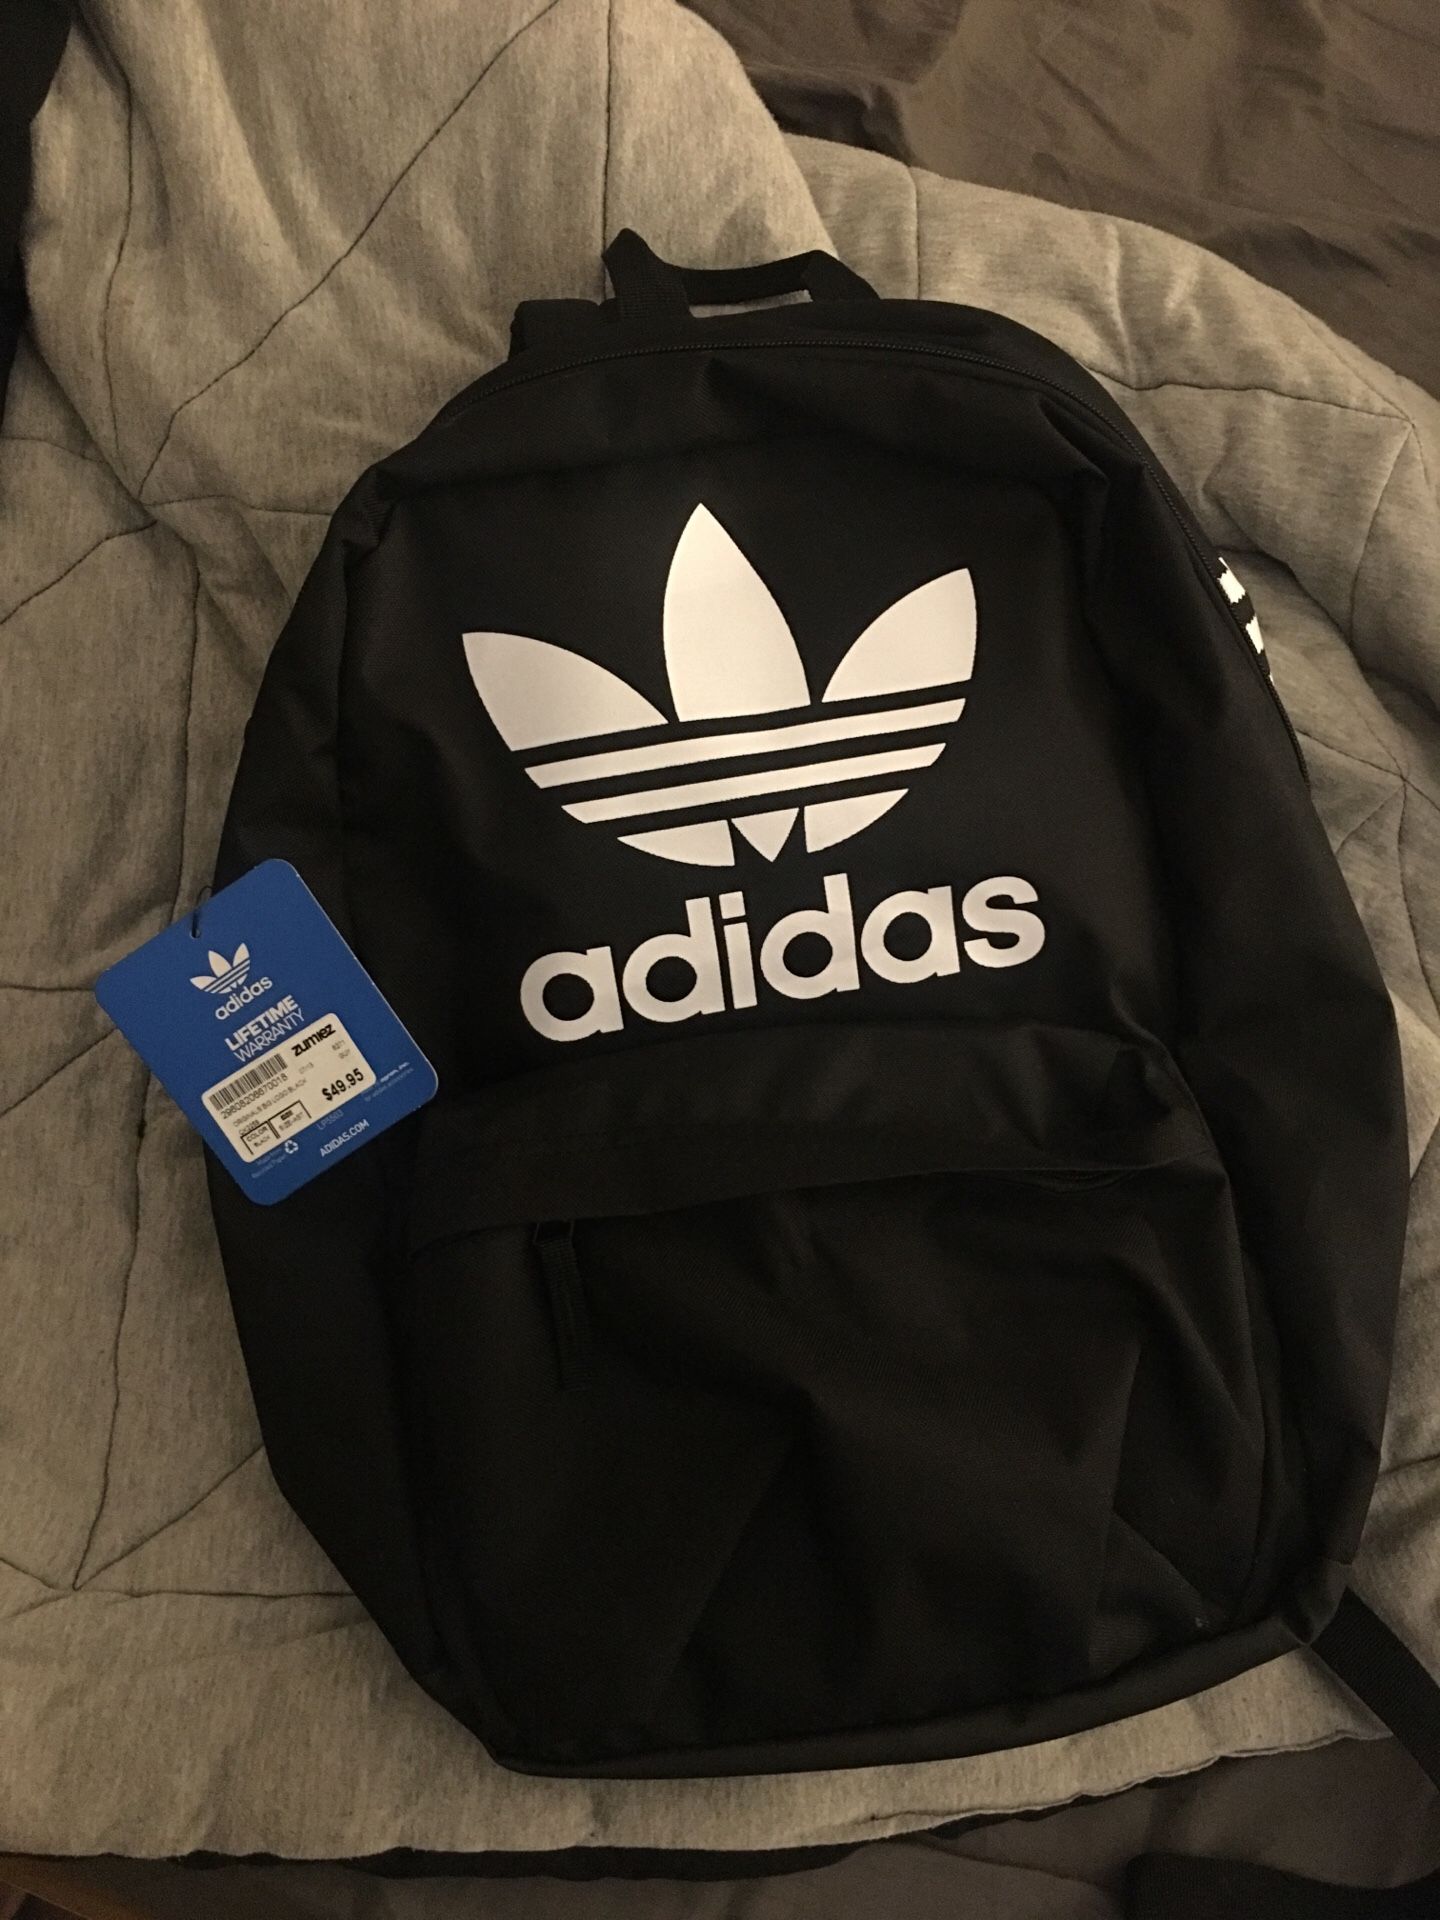 Brand new adidas backpack